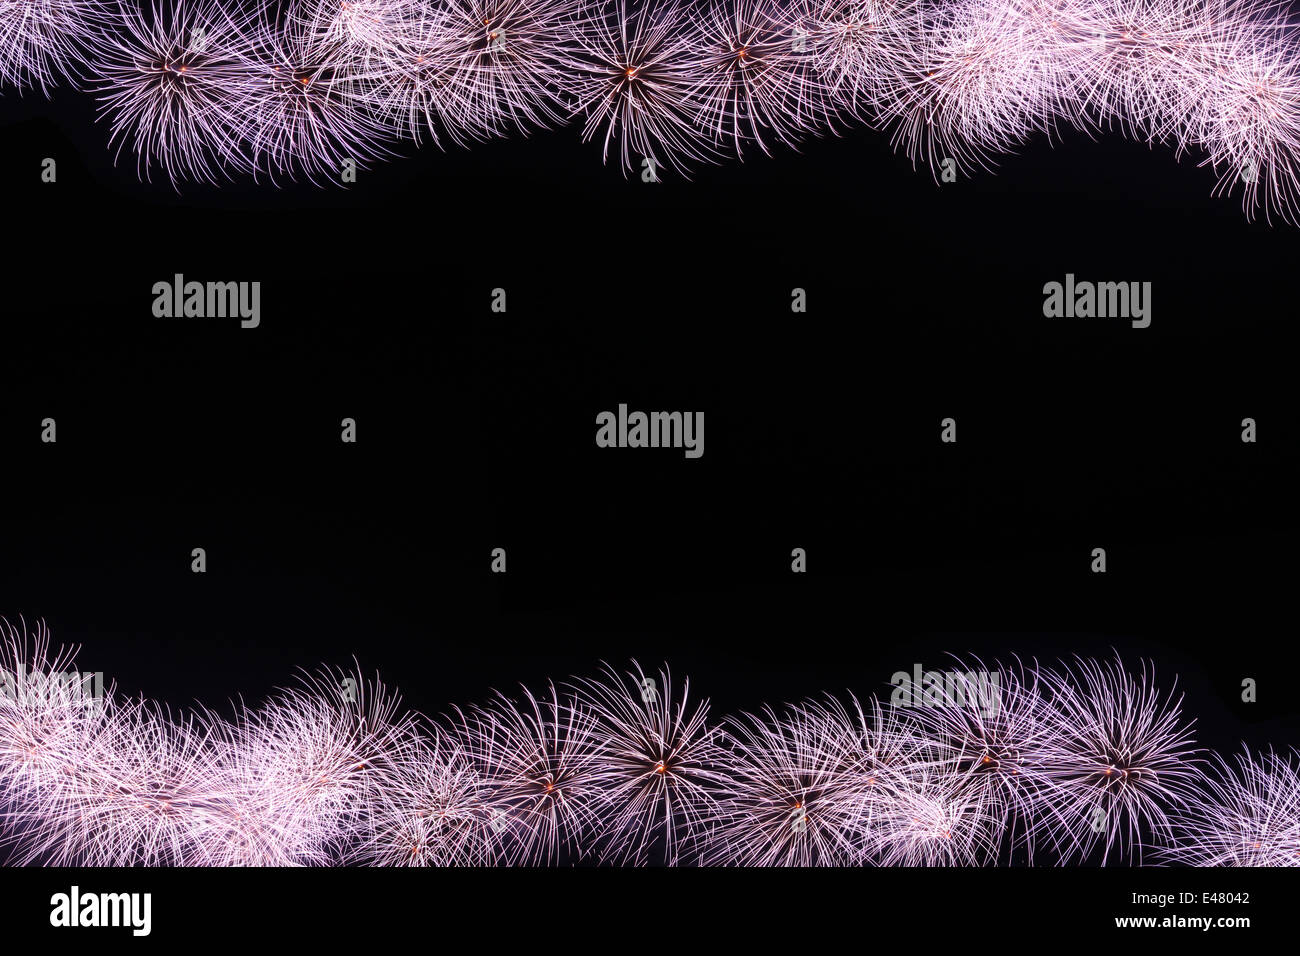 Fireworks or firecracker of frame in the darkness background. Stock Photo